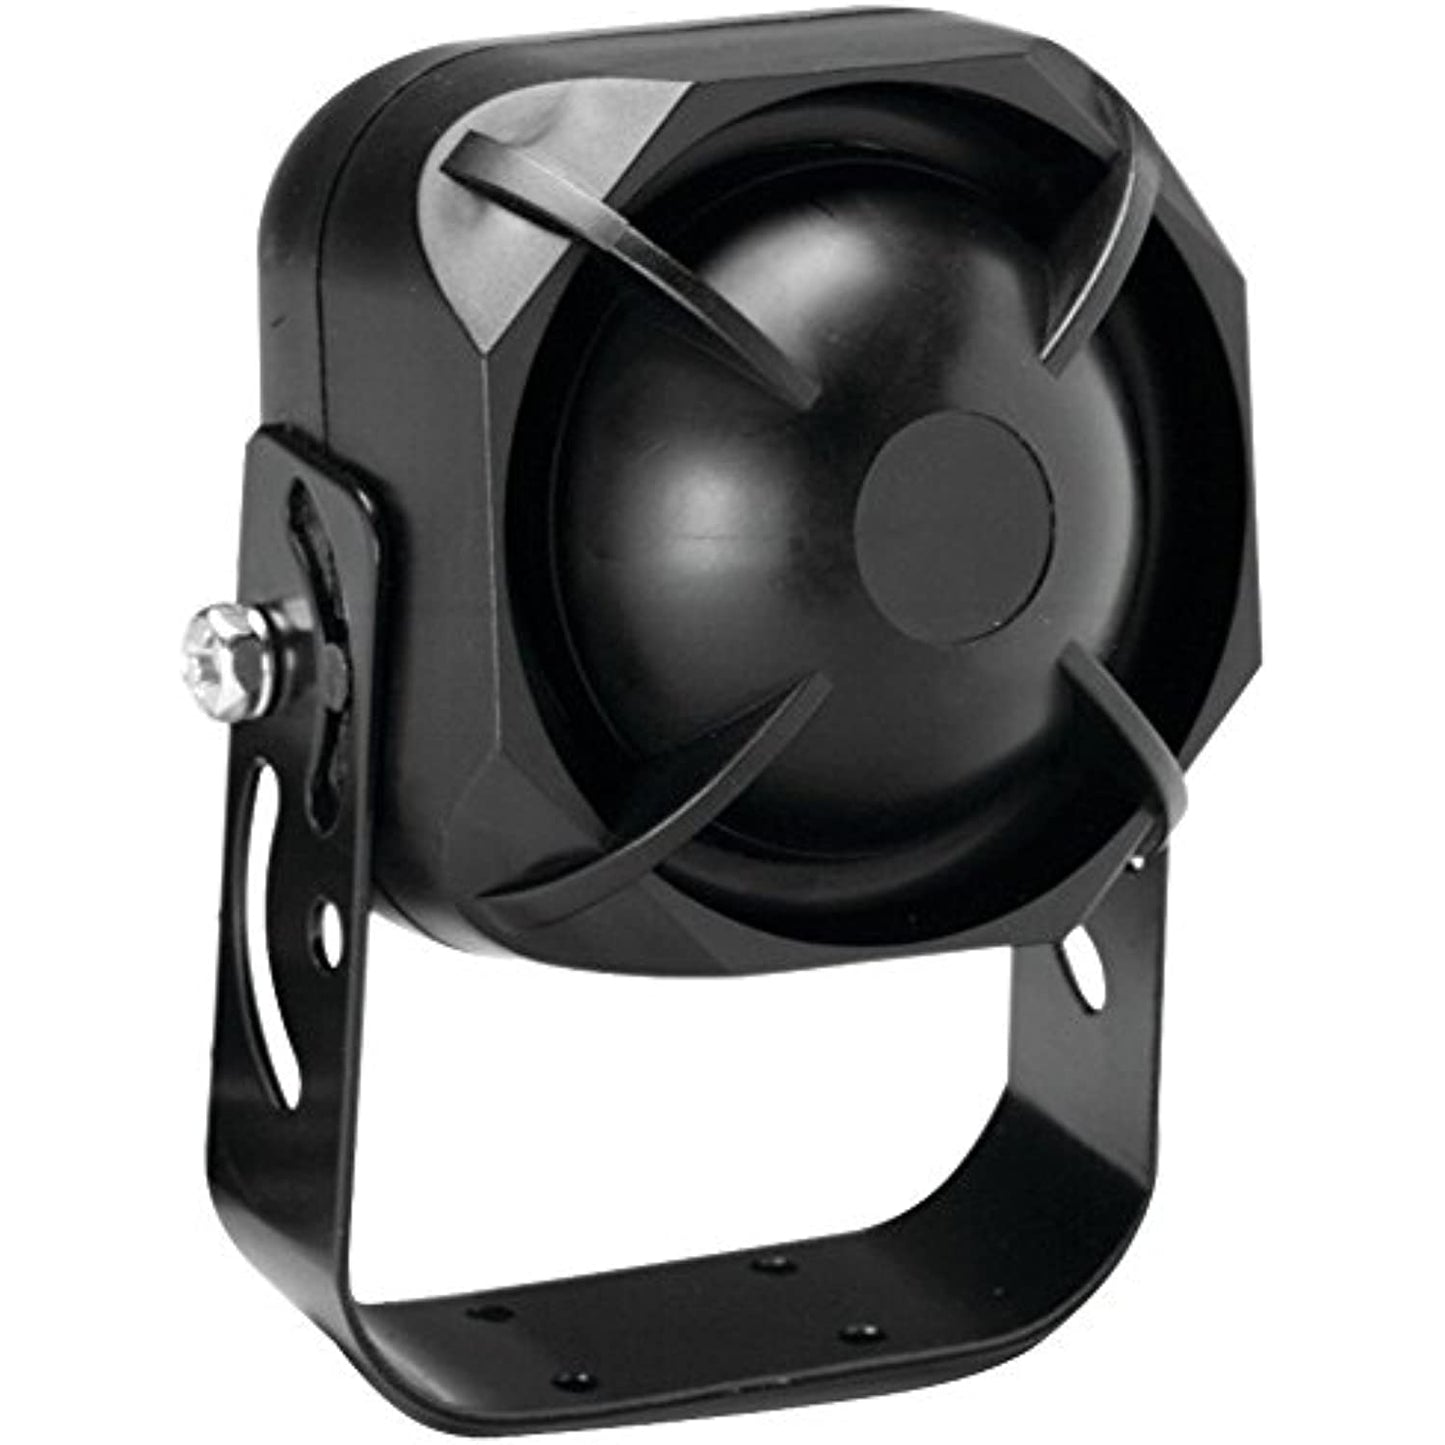 Install Essentials 515R Self-Powered Rechargeable 6-Tone Siren